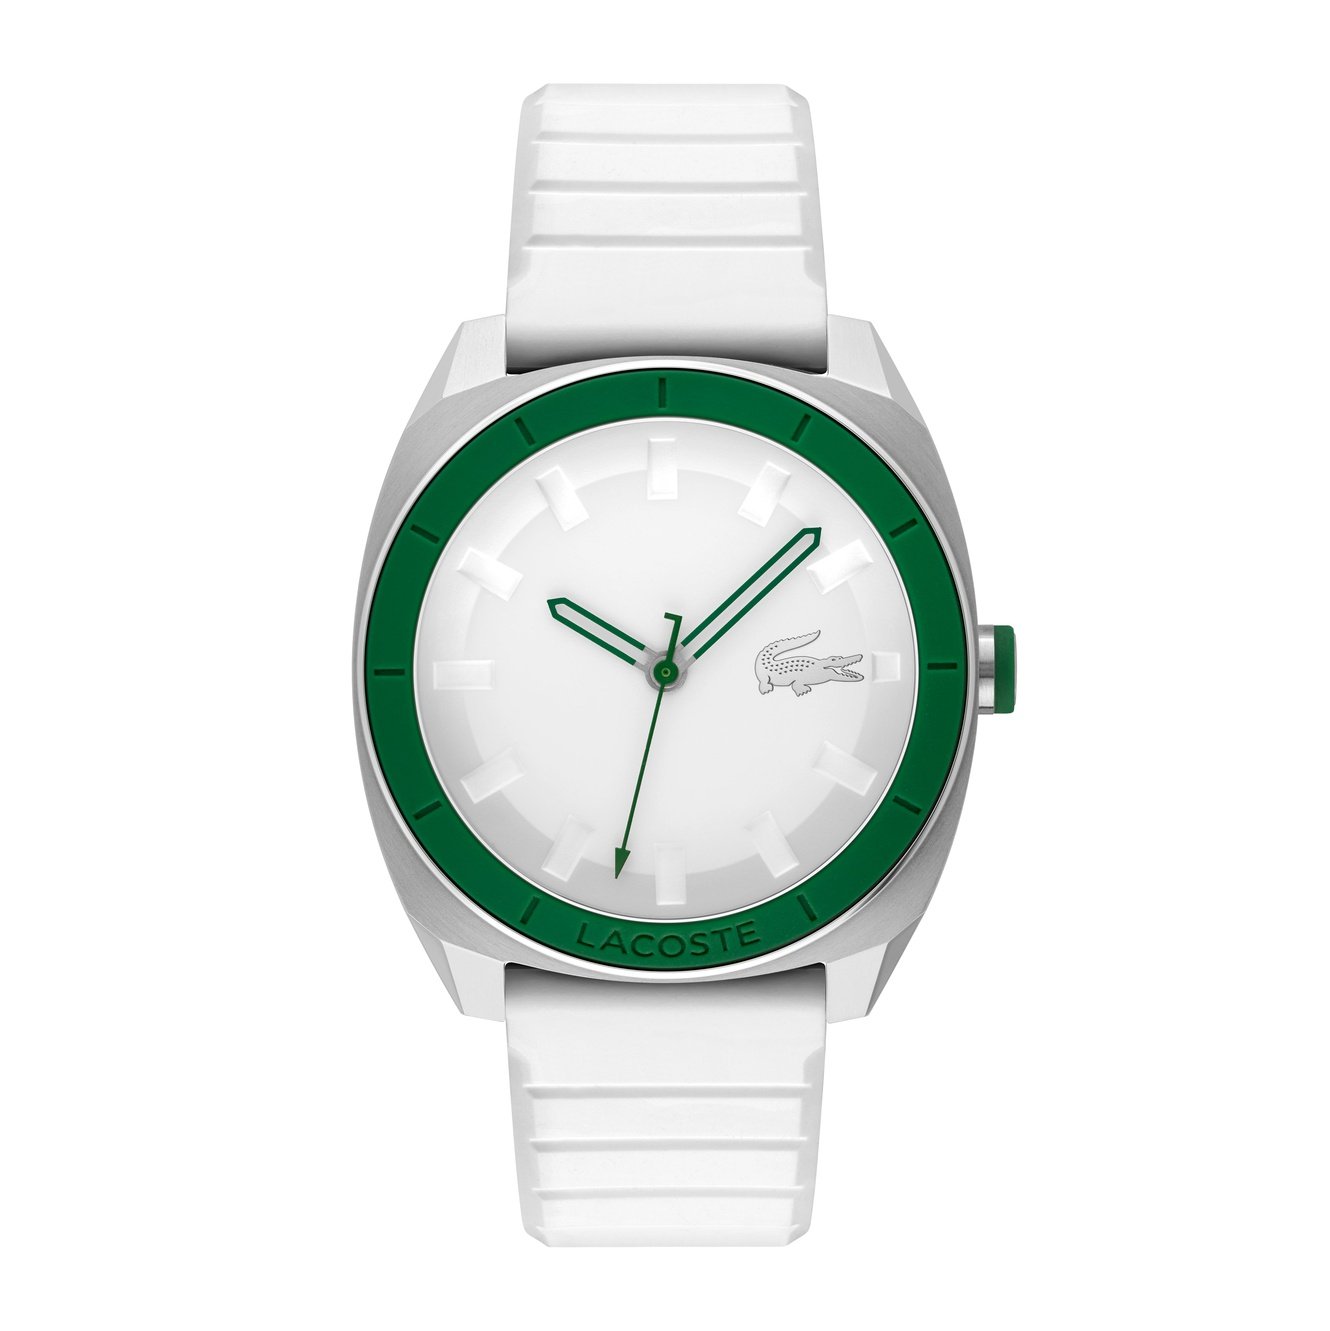 under 3 100 Gifts Page Time Watch JOD - Center